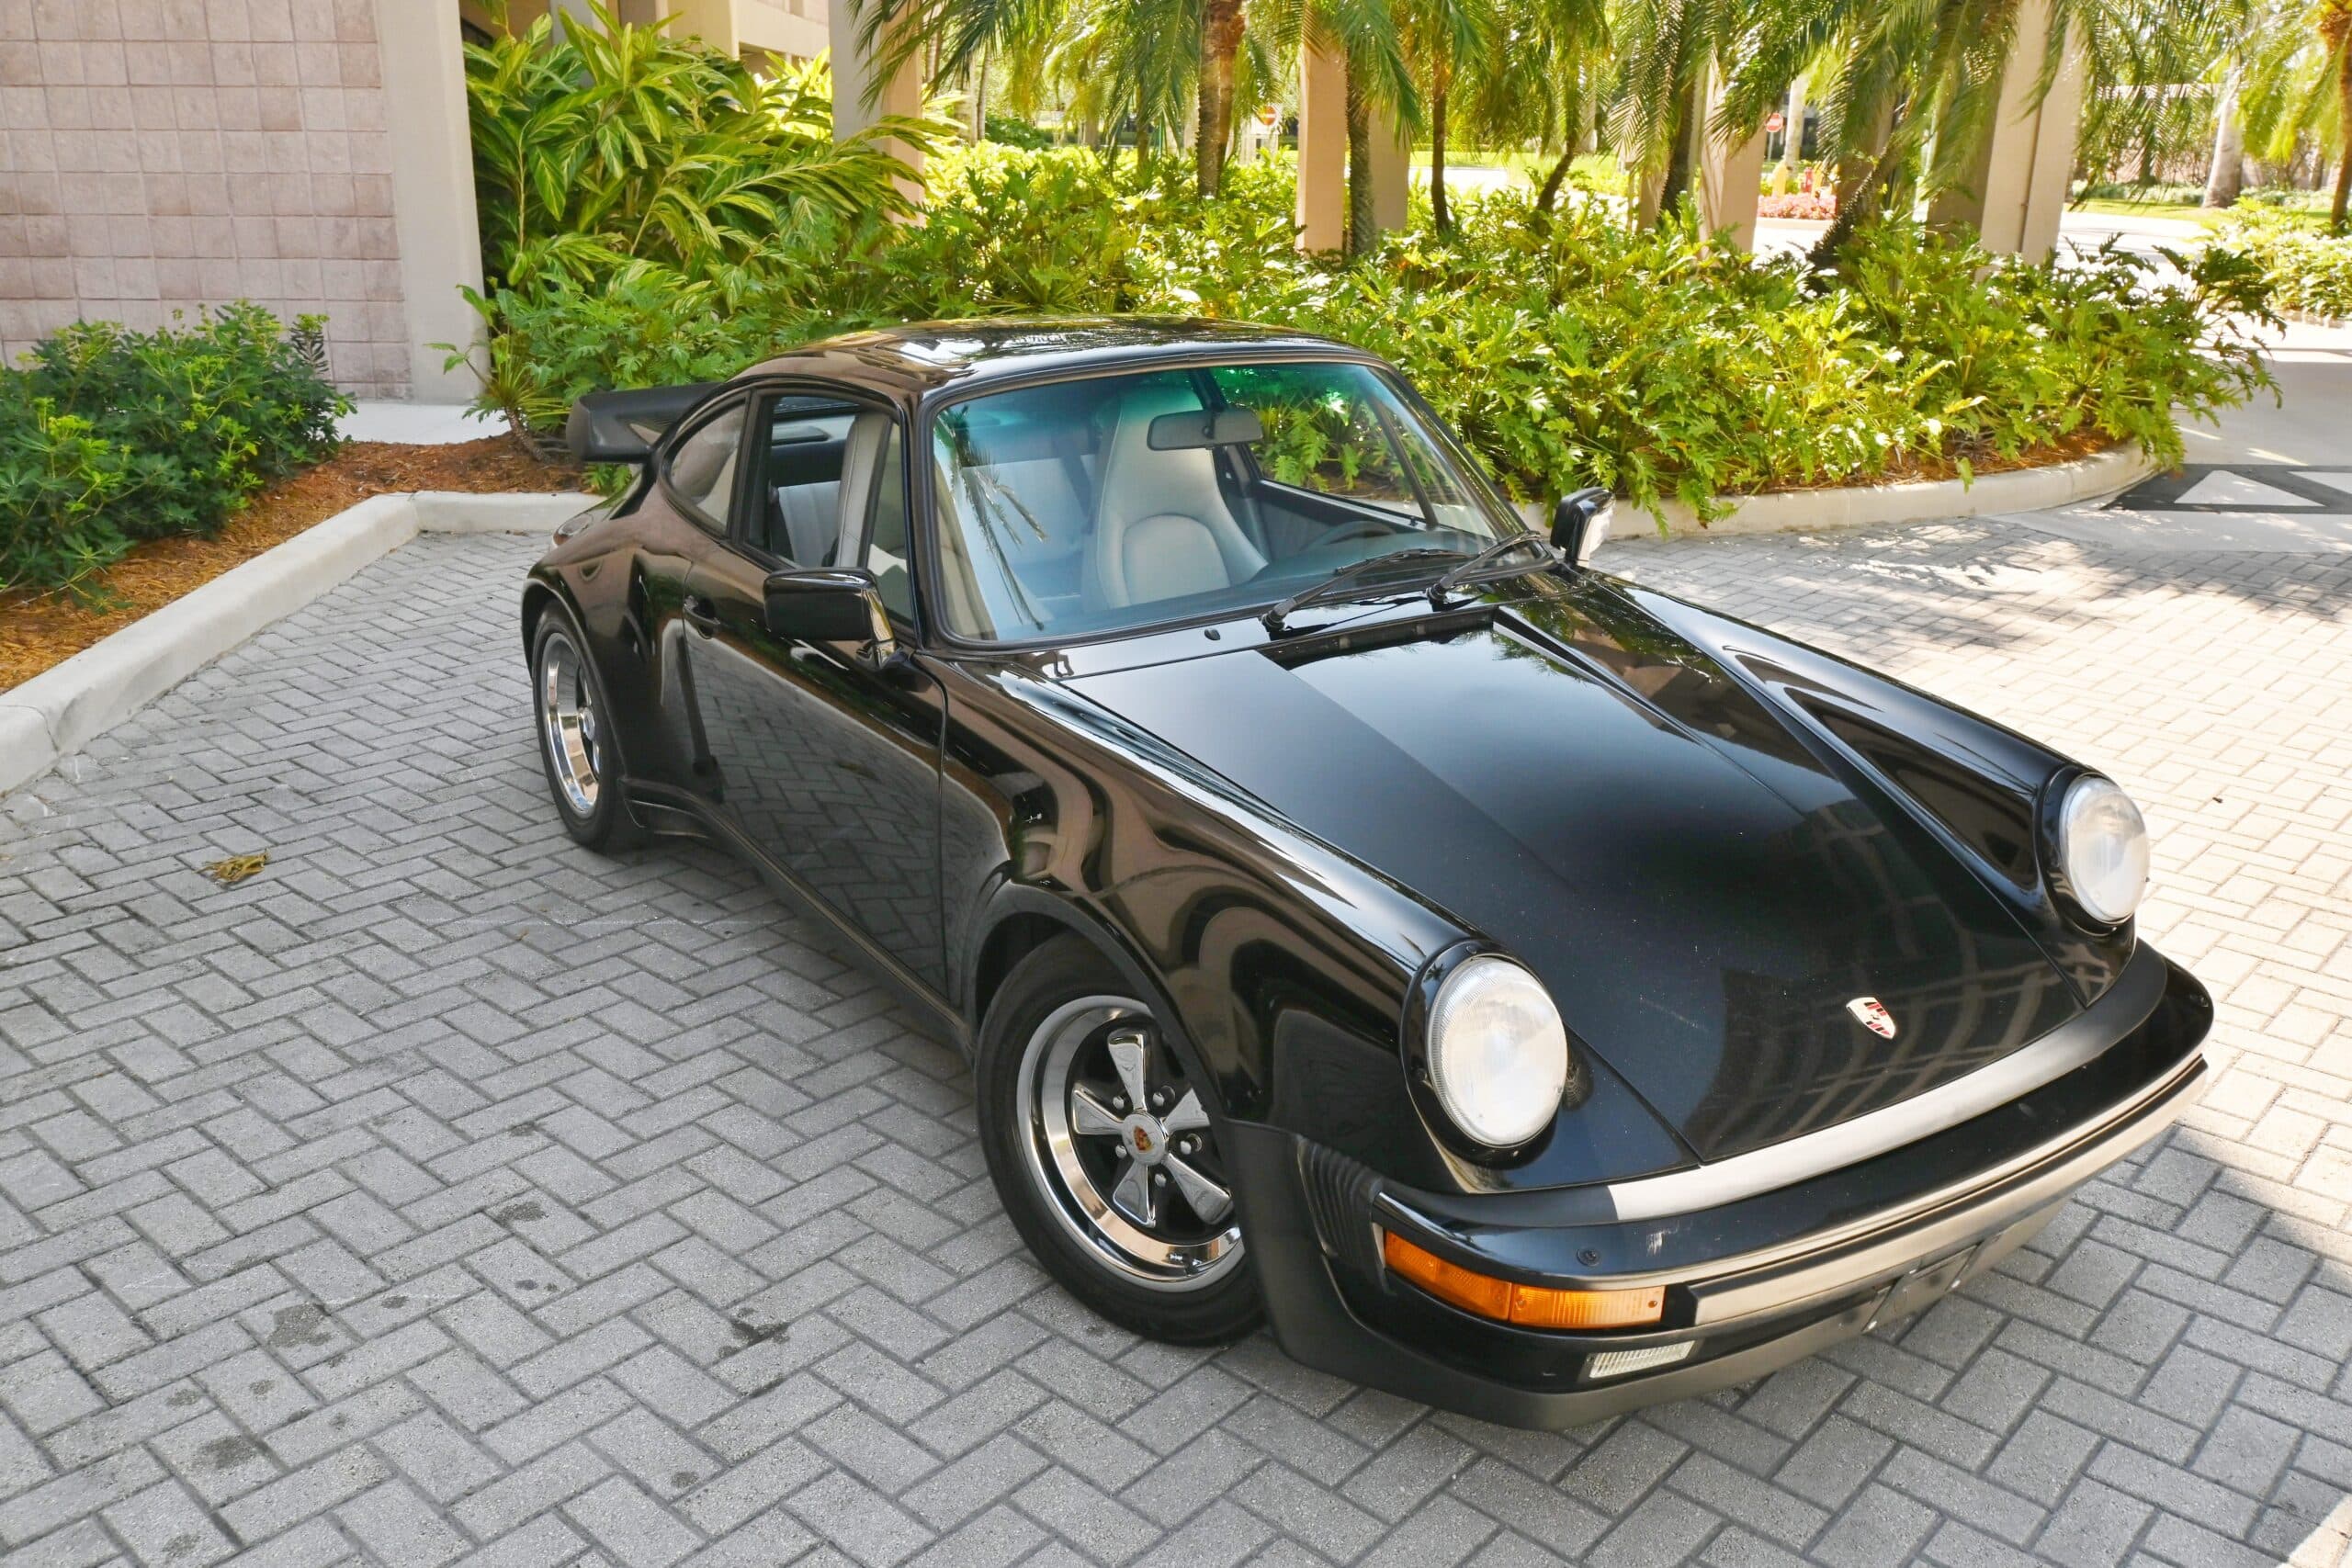 Porsche Matte Black - Cars Paint By Numbers - Paint by numbers for adult